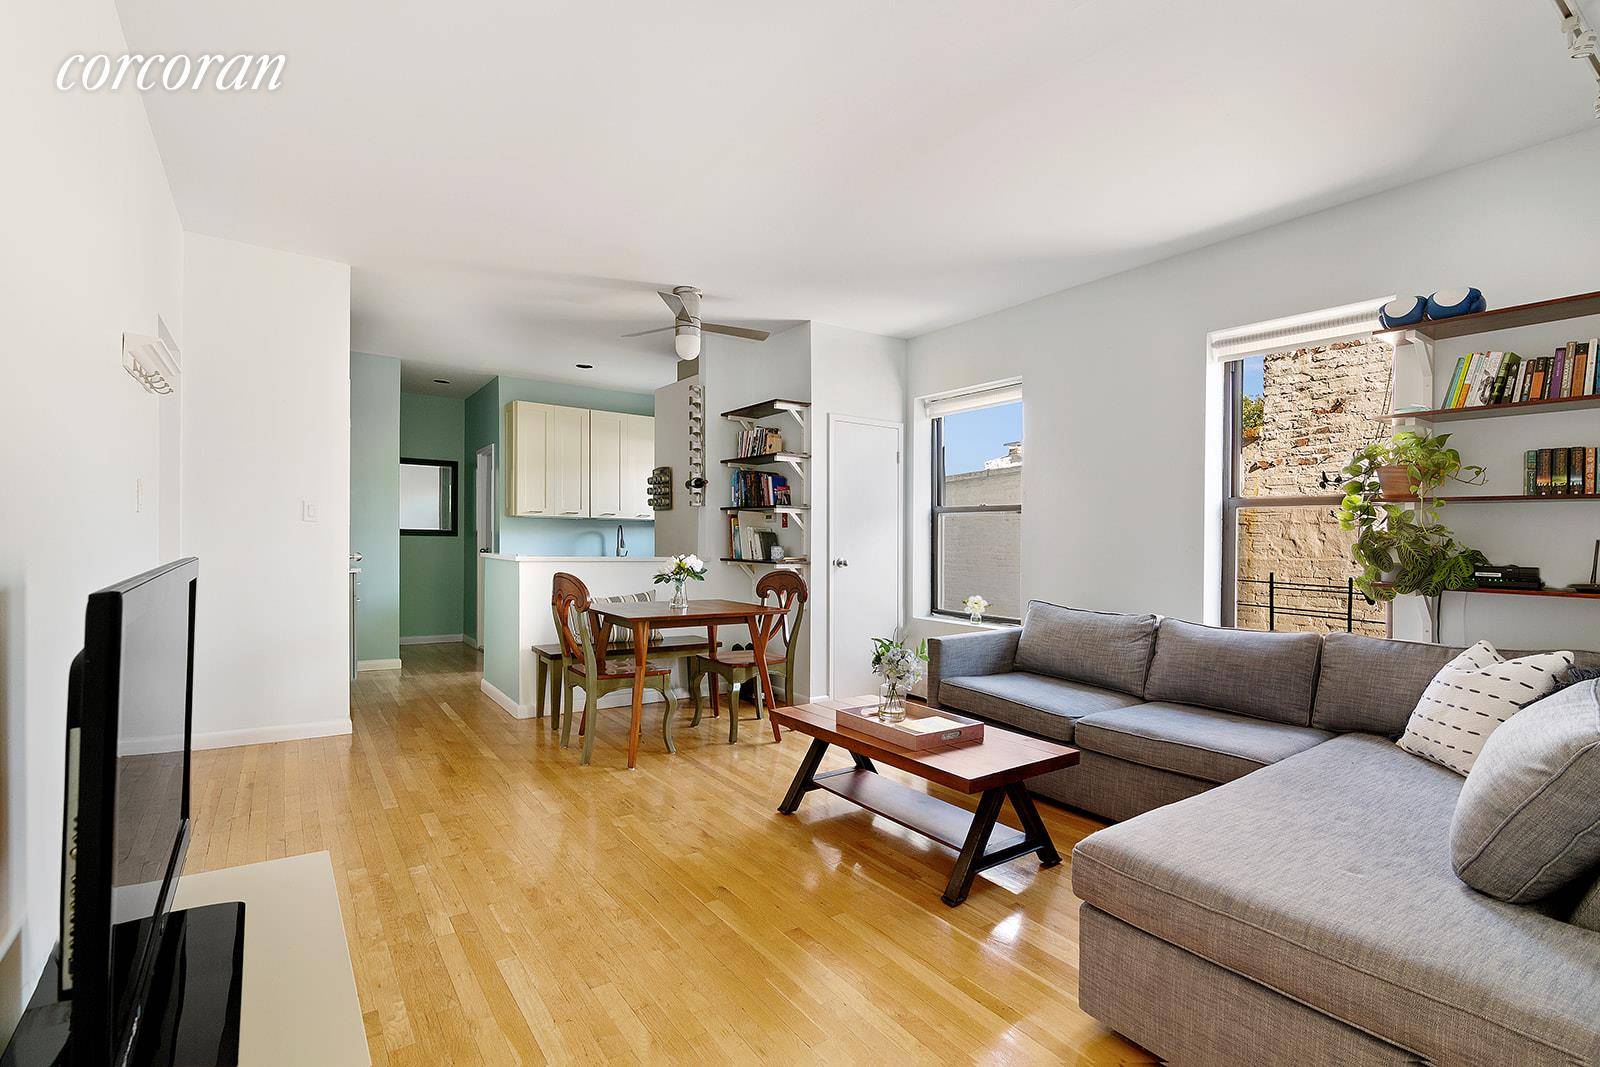 Welcome to this renovated two bedroom, one bathroom co op located on the beautiful, tree lined 13th Street !